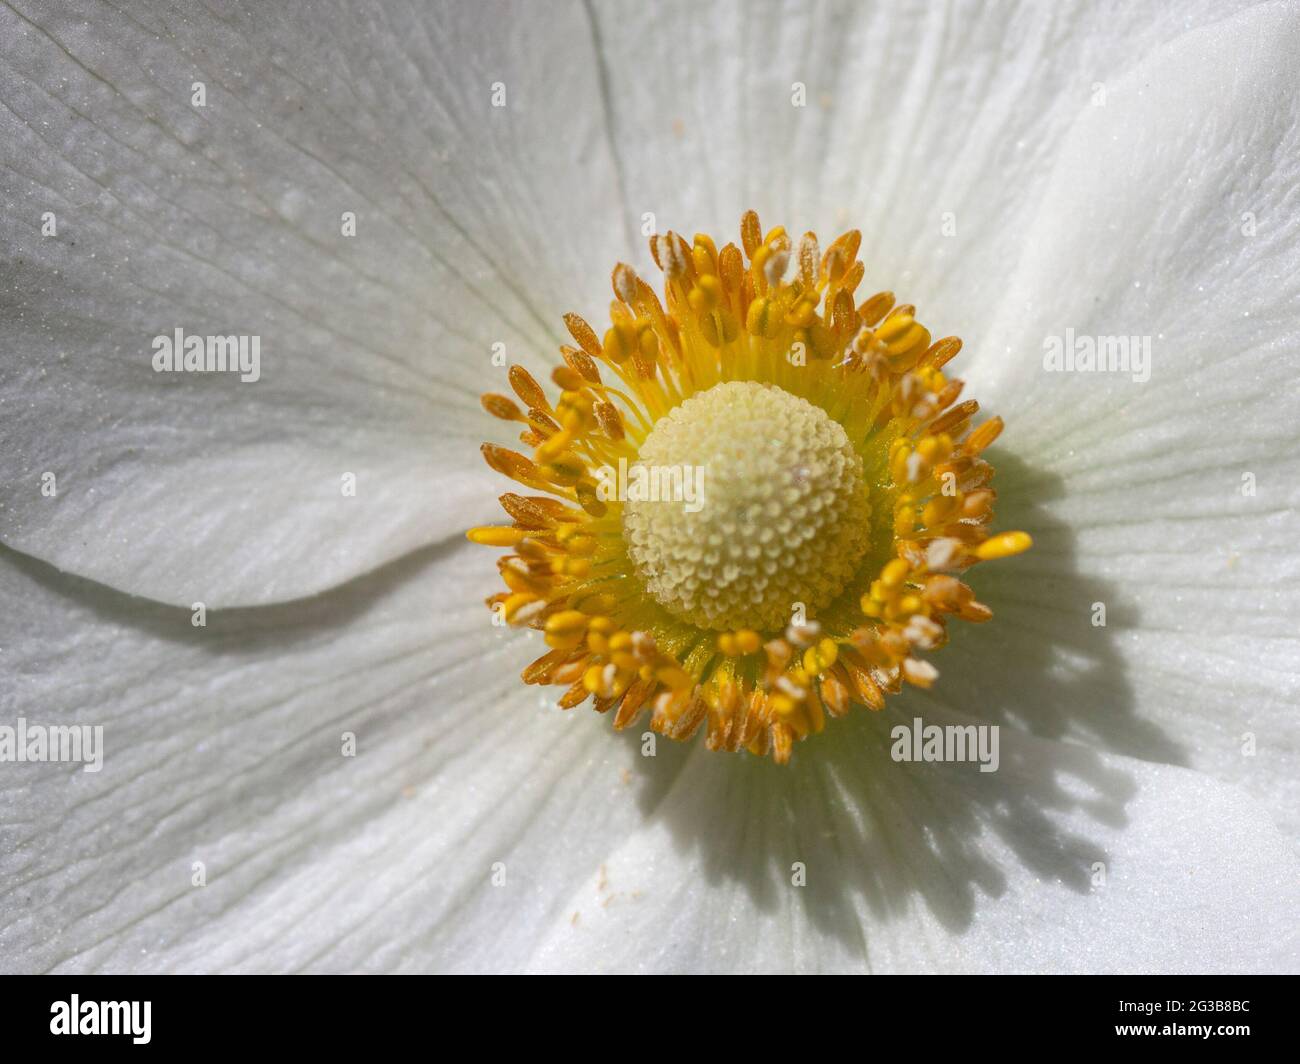 Close up of a flower center of Anemone sylvestris showing anatomy parts such as staments and pistils Stock Photo